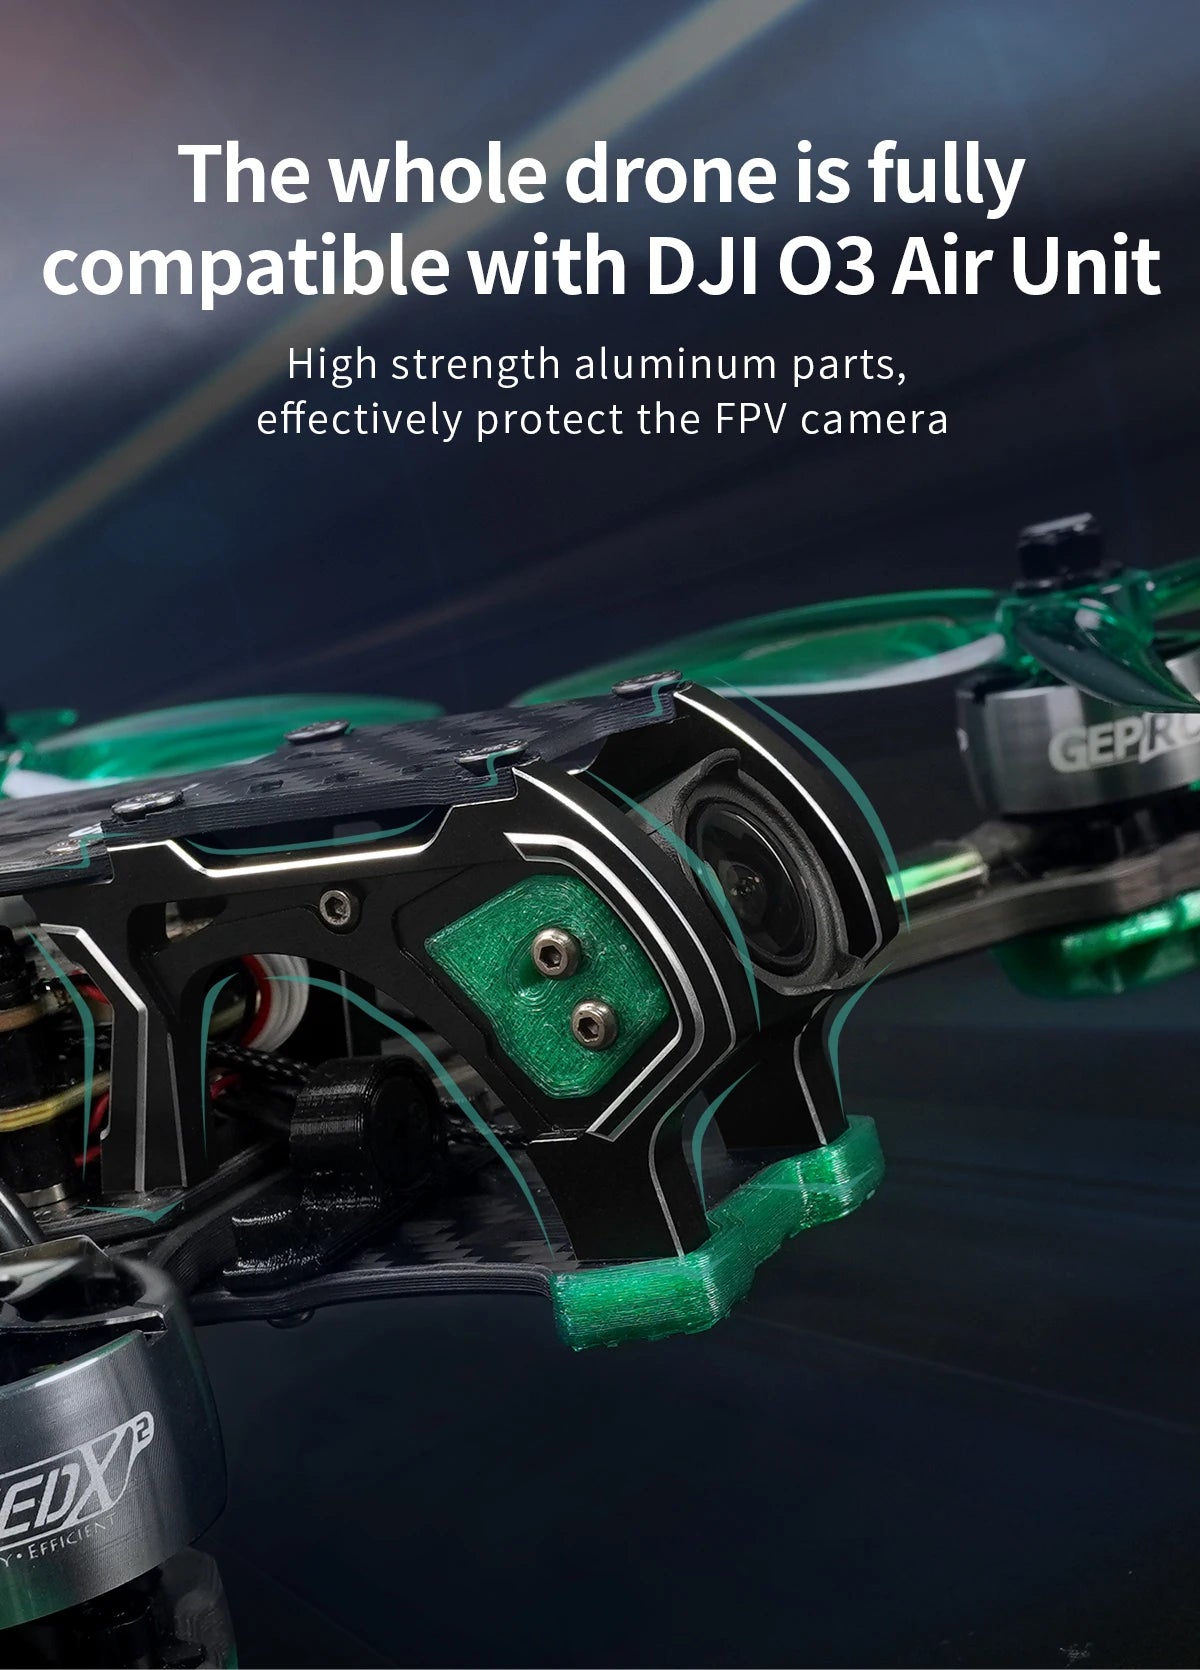 GEPRC New MARK5 HD O3 Freestyle FPV Drone, the whole drone is fully compatible with DJI 03 Air Unit High strength aluminum parts, effectively protect